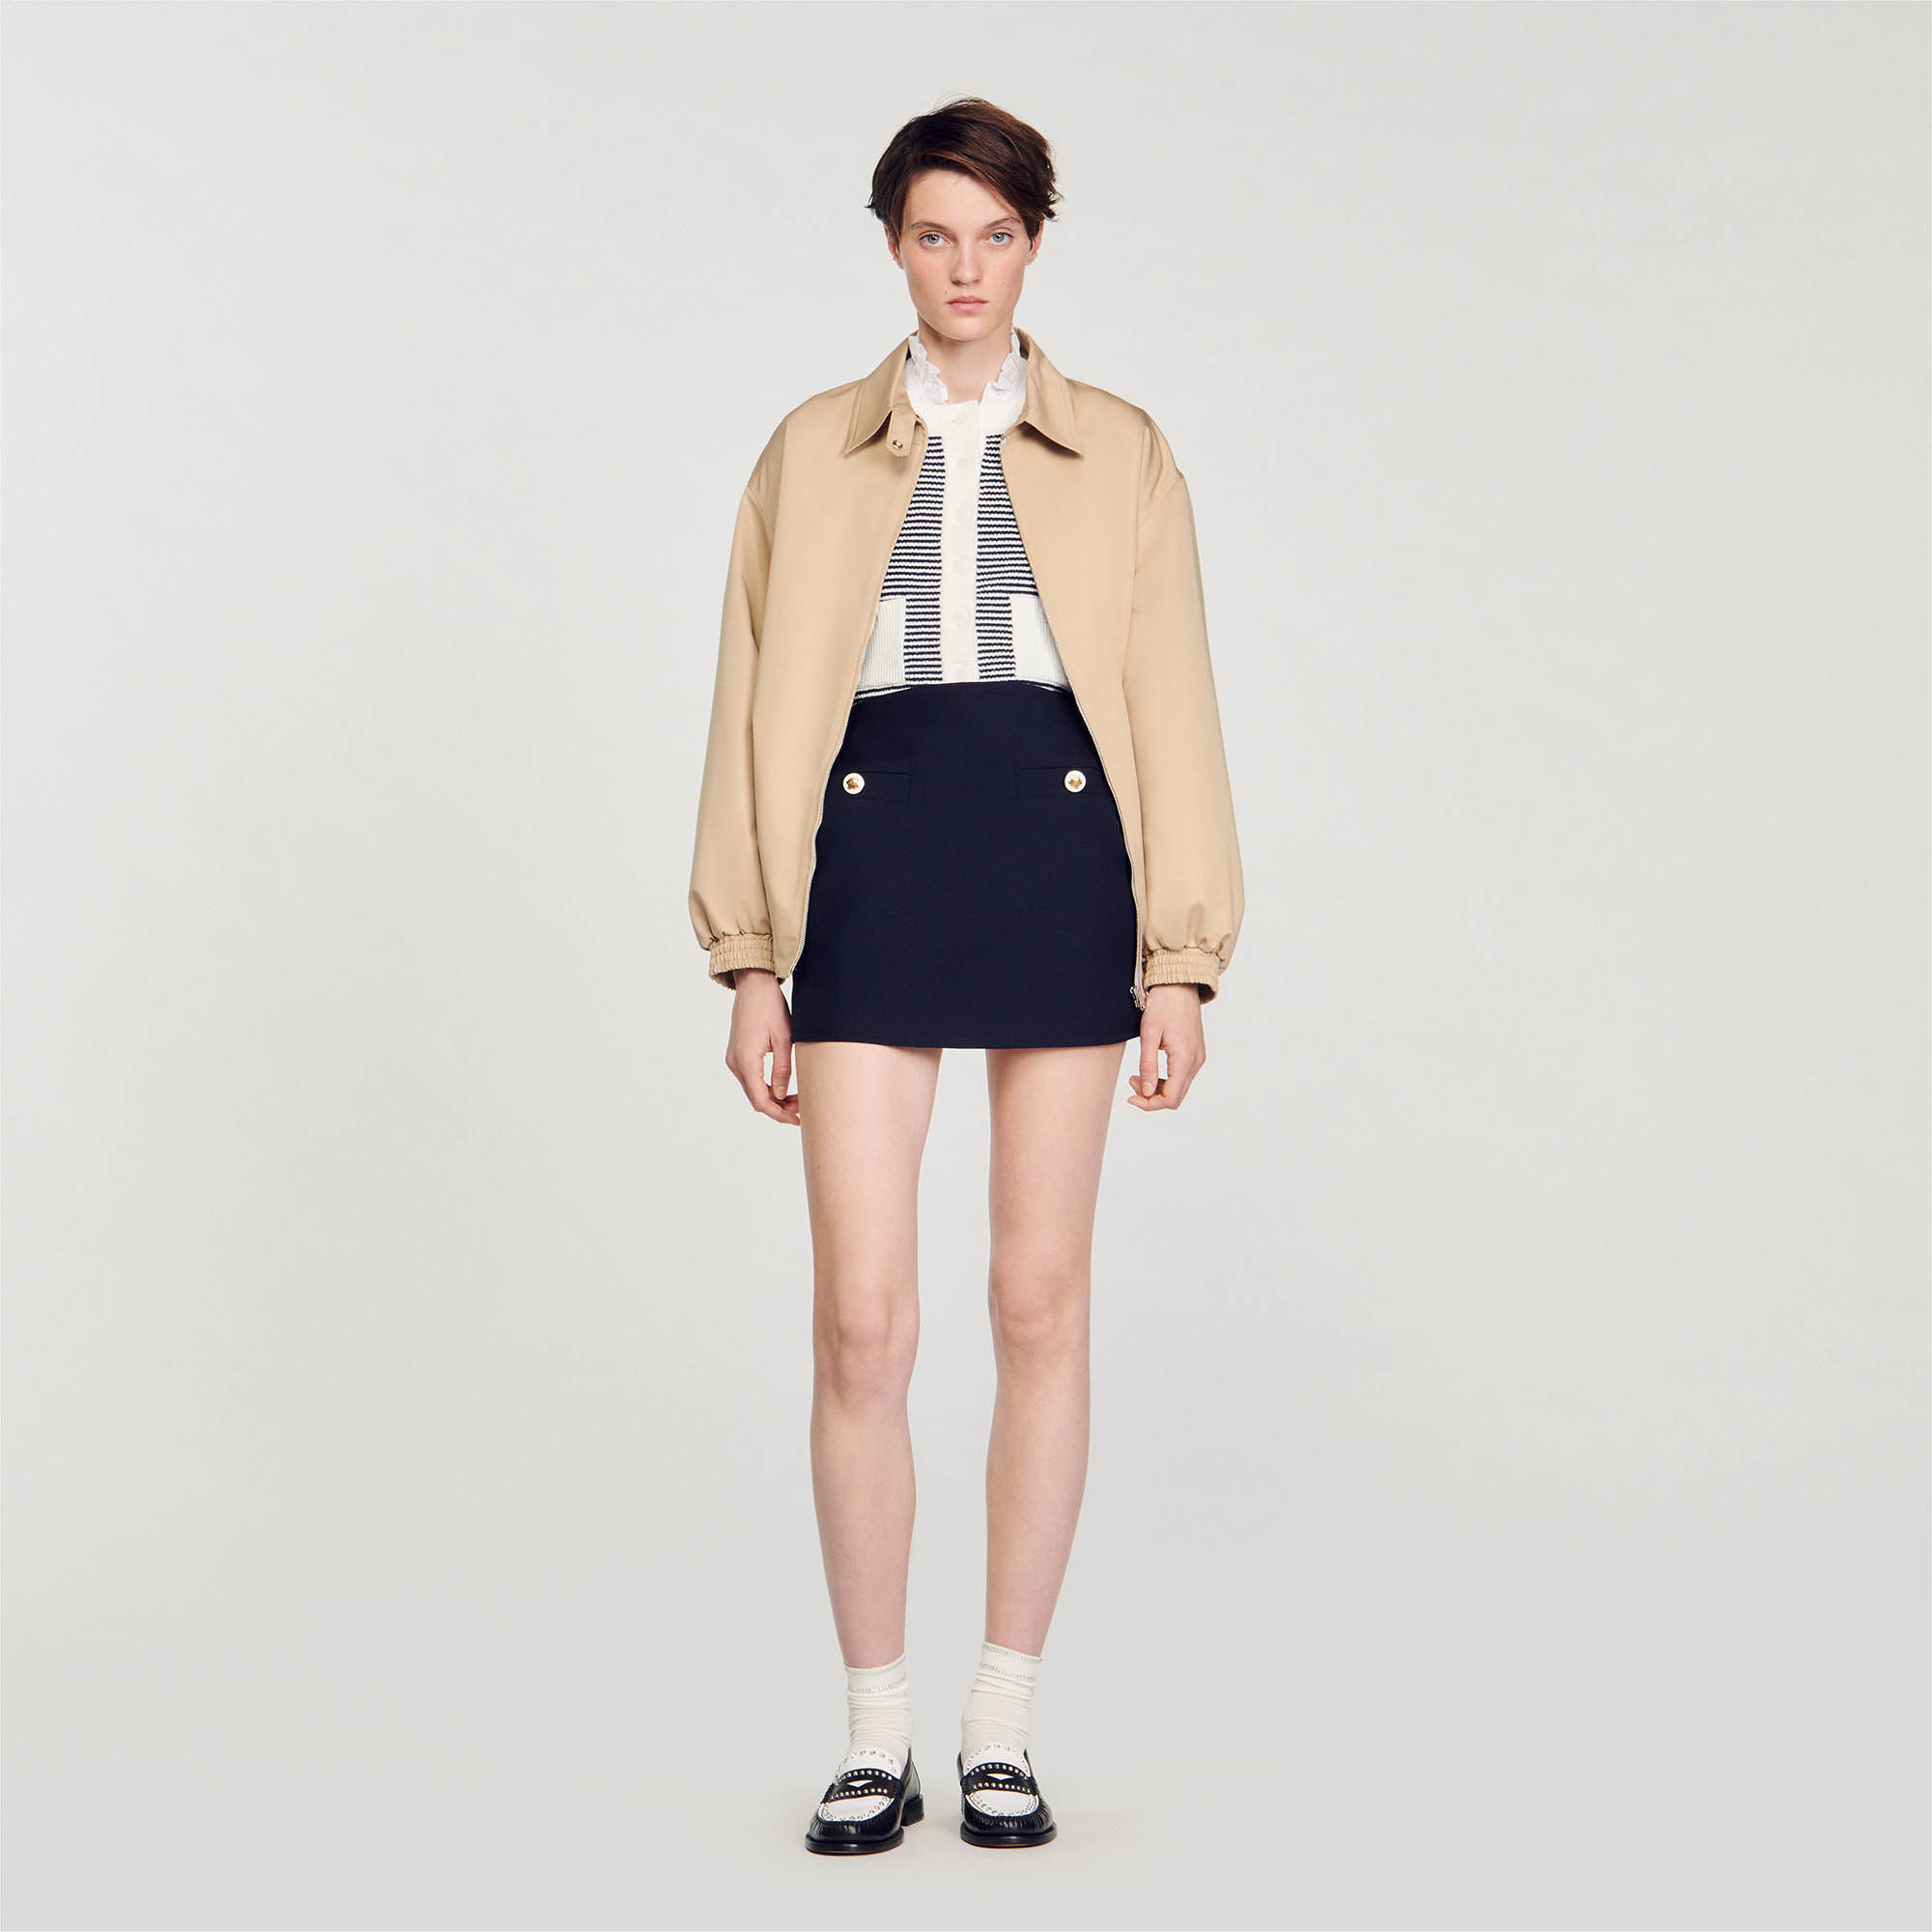 Sandro virgin wool Short skirt in wool-blend twill, with small side slits and welted mock pockets on the front embellished with decorative buttons